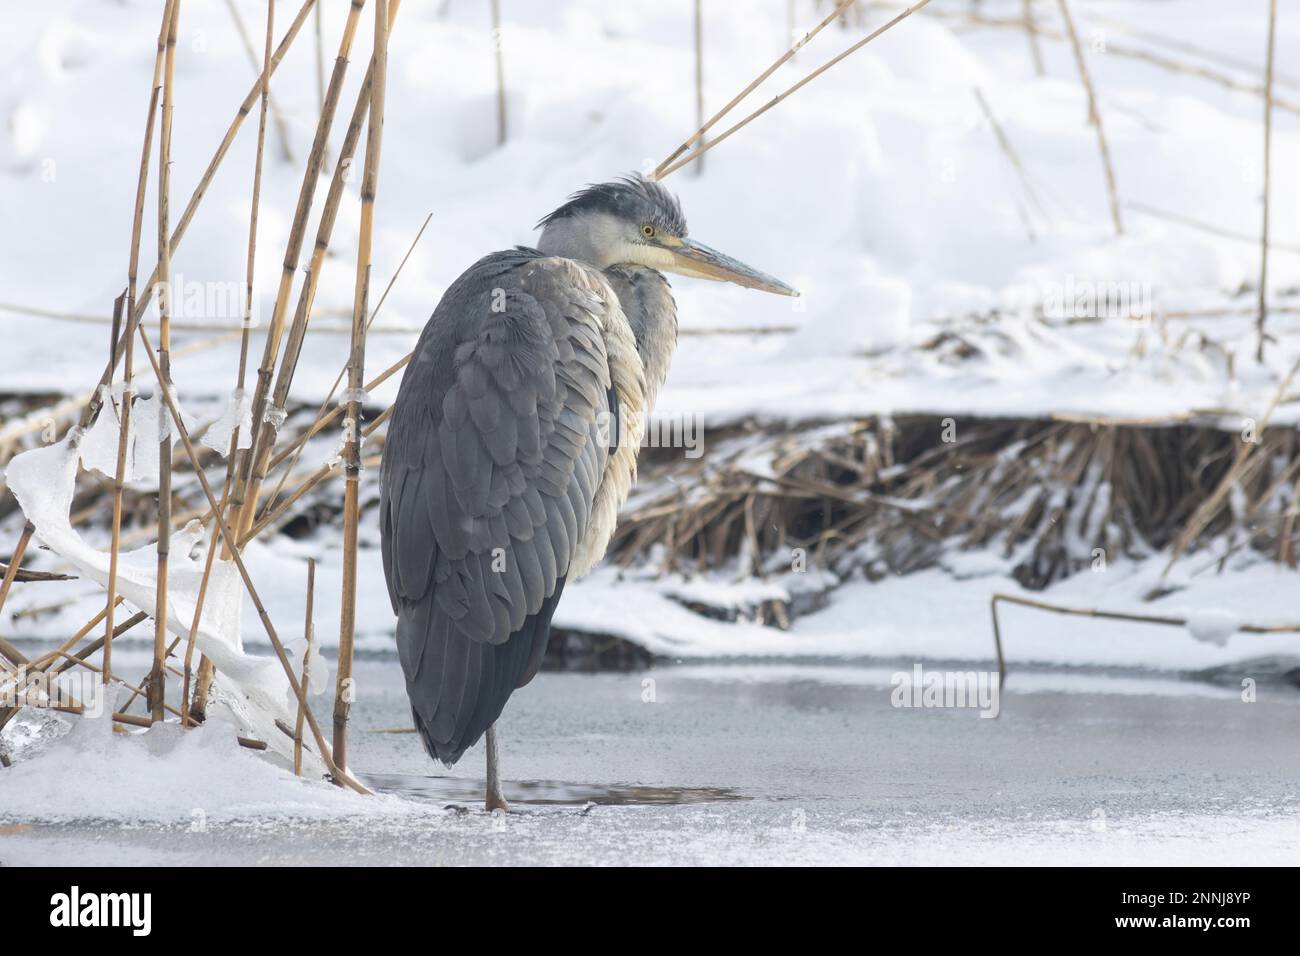 A grey heron in Finland during winter Stock Photo